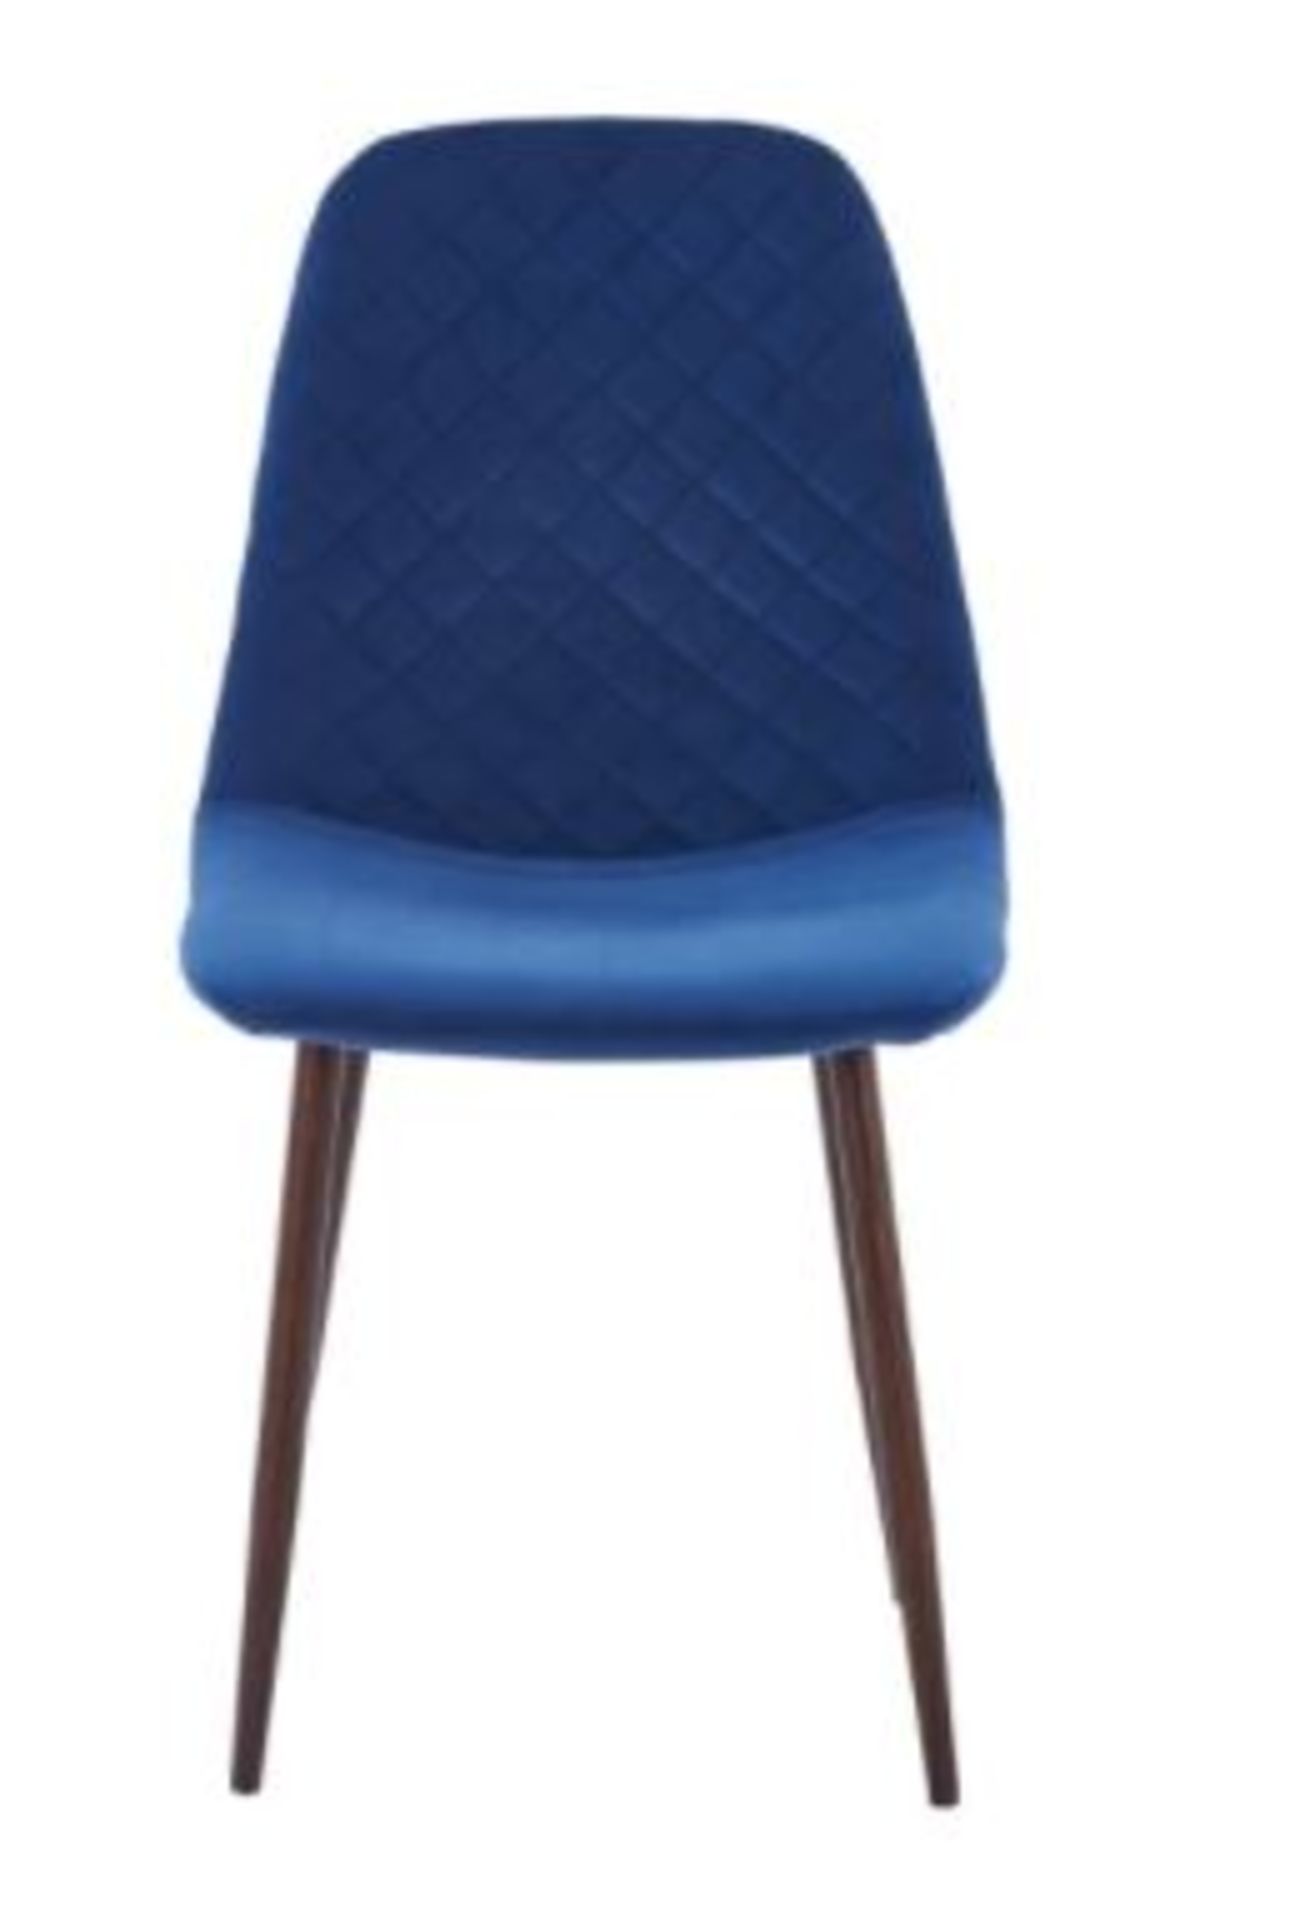 (R10H) 2 X Perth Navy Velvet Chair. Walnut Effect Metal Frame With Fully Upholstered Seat. (H84xW53 - Image 2 of 3